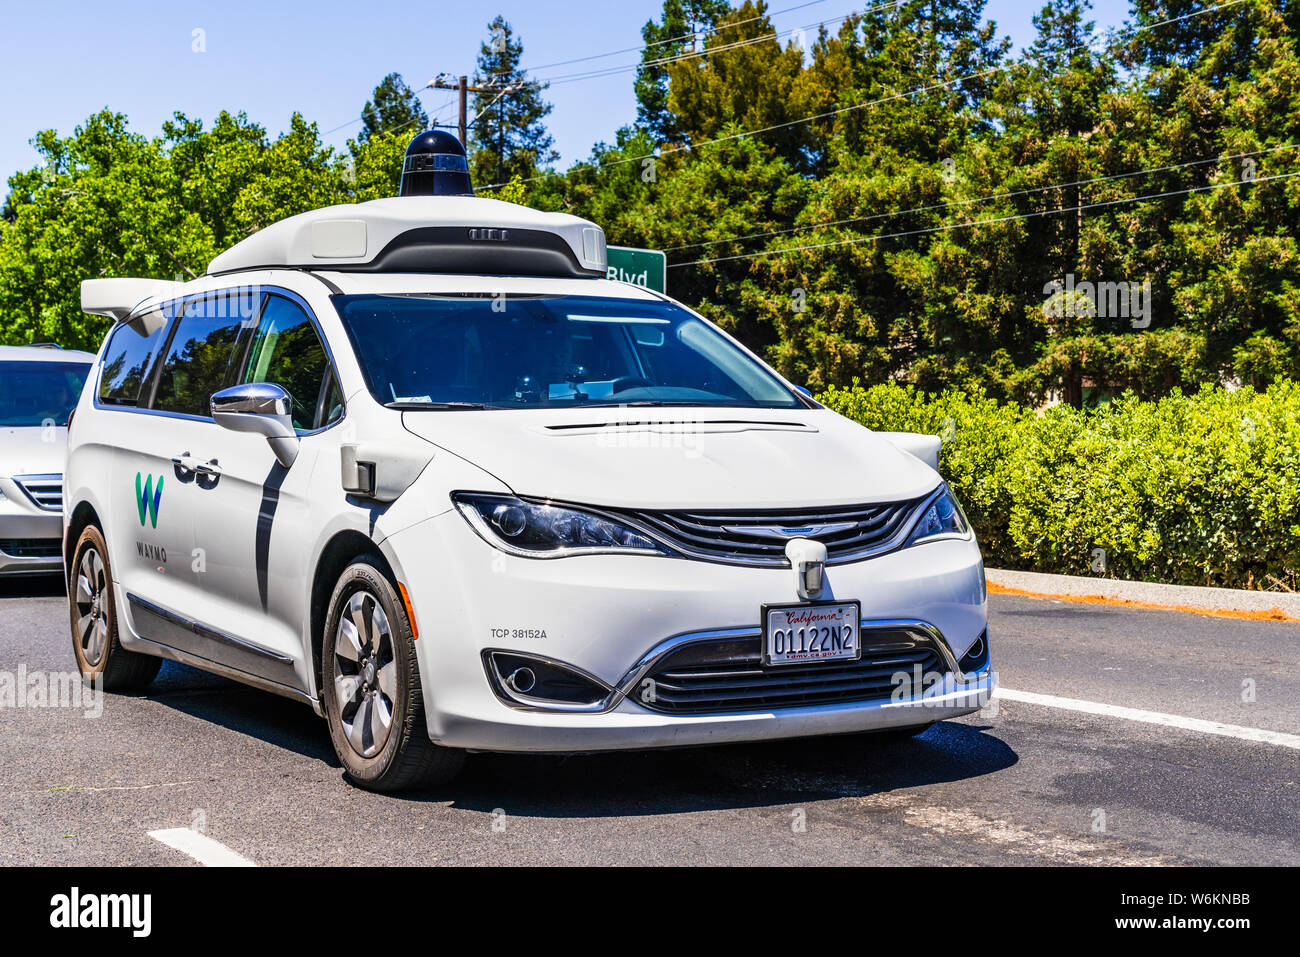 July 2, 2019 Mountain View / CA / USA - Waymo self driving car performing tests on a street near Google's headquarters, Silicon Valley; Waymo, a subsi Stock Photo